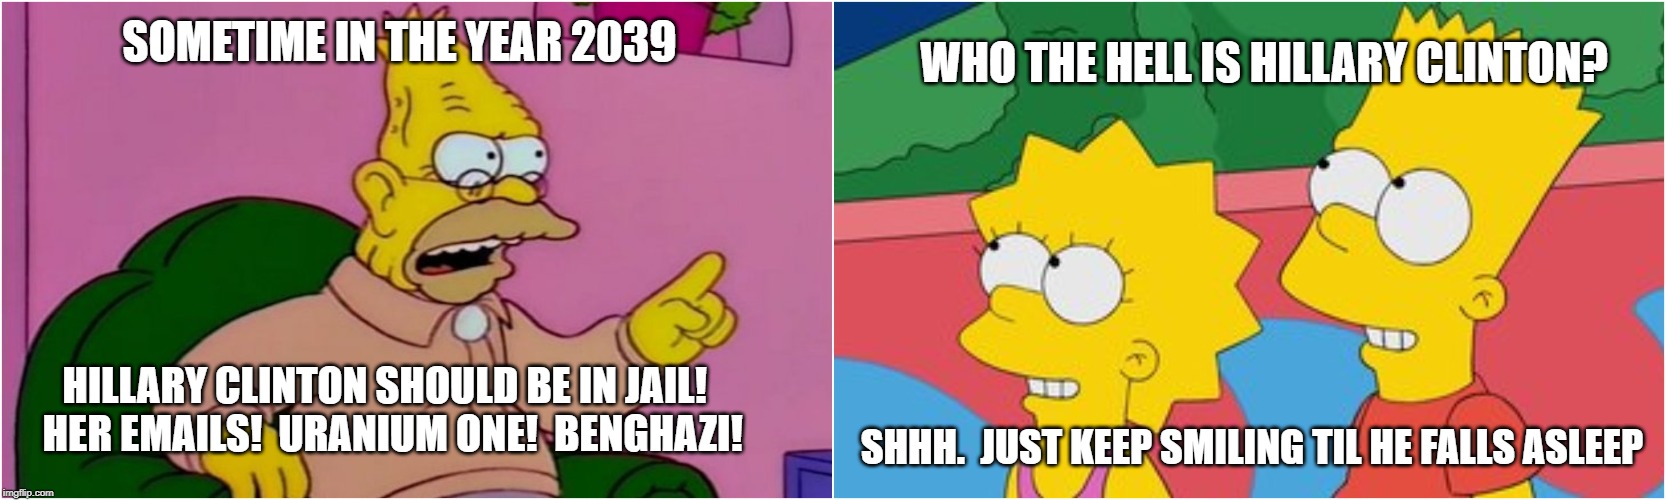 But Her Emails! | WHO THE HELL IS HILLARY CLINTON? SOMETIME IN THE YEAR 2039; HILLARY CLINTON SHOULD BE IN JAIL!  HER EMAILS!  URANIUM ONE!  BENGHAZI! SHHH.  JUST KEEP SMILING TIL HE FALLS ASLEEP | image tagged in but her emails,benghazi,useful idiots,trump,hillary,can't let go | made w/ Imgflip meme maker